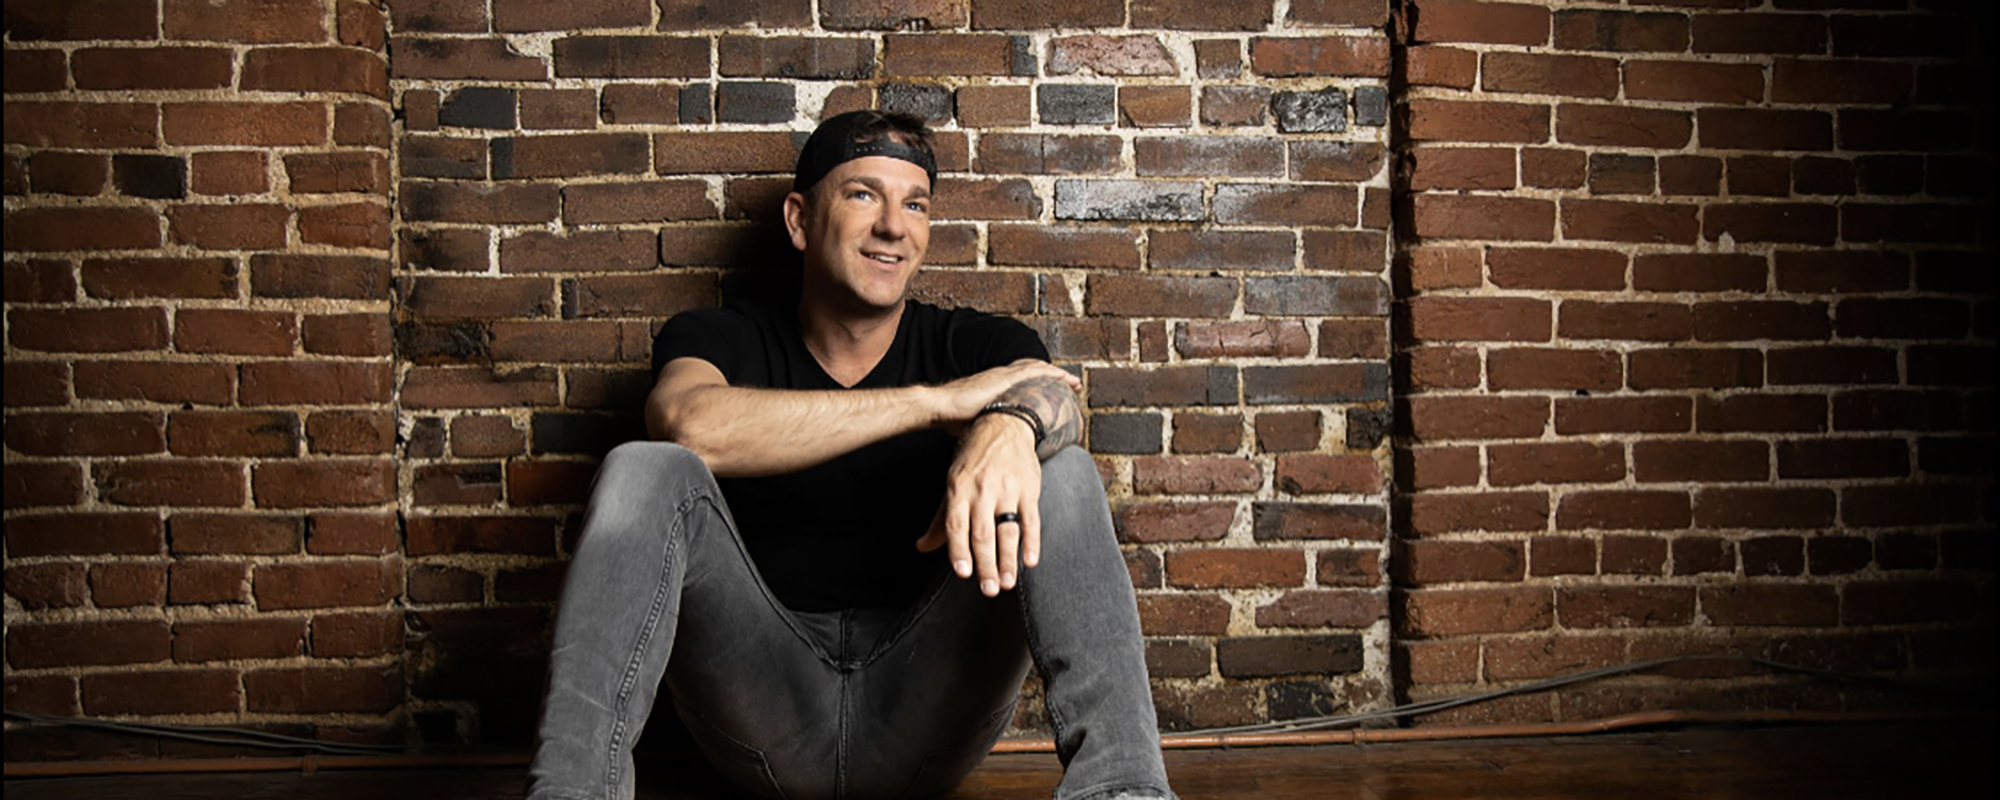 Q&A with Craig Campbell on New Album, Coffee Shop: “It’s Good Times”